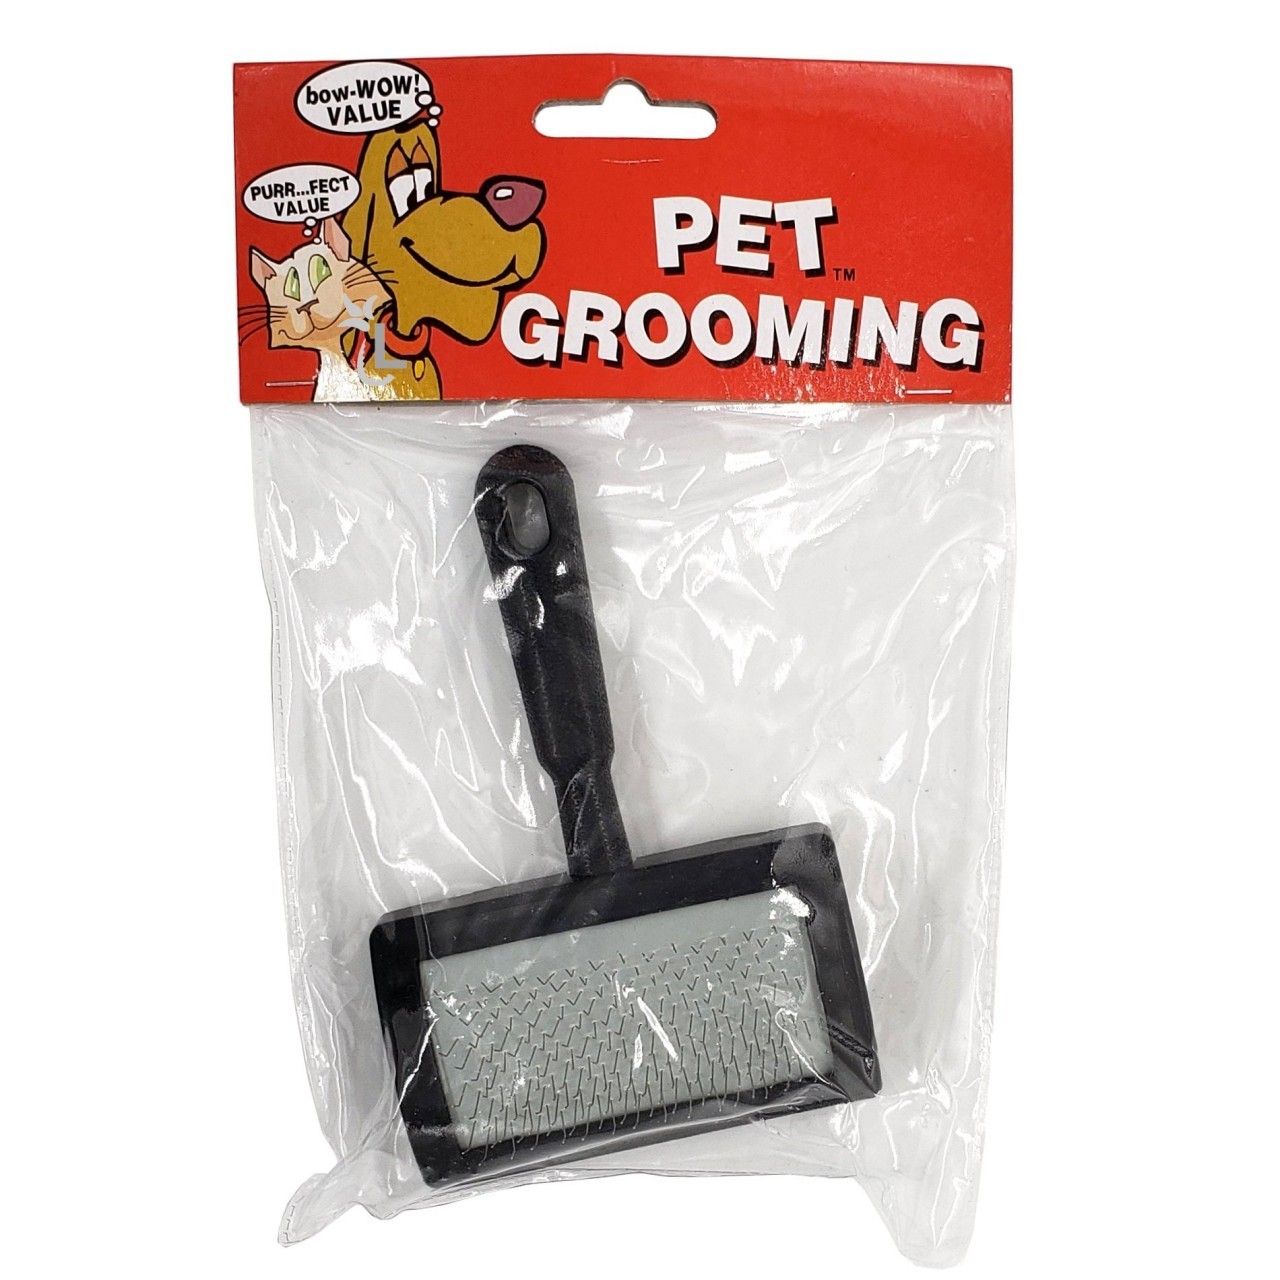 BOW-WOW VALUE PET GROOMING BRUSH 1ct